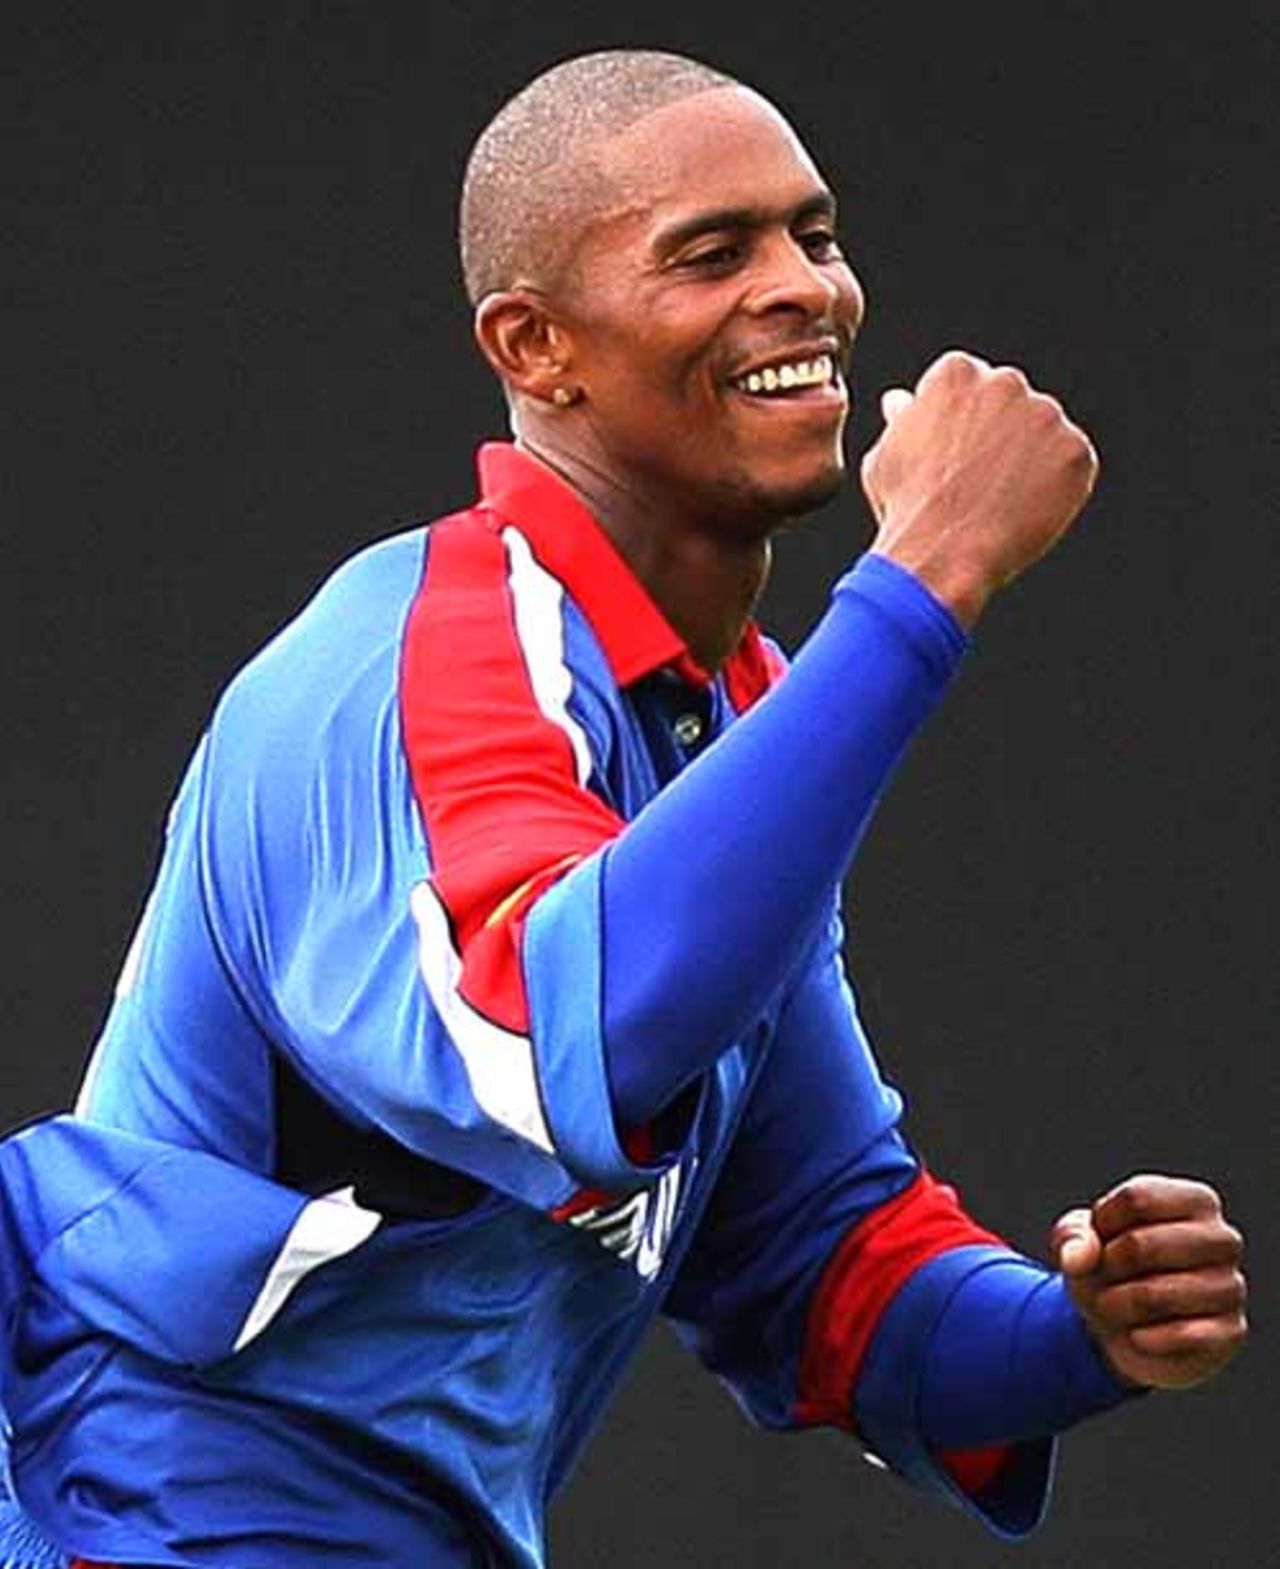 Kevin Hurdle is all smiles as Upul Tharanga walks after being caught down the leg side, Bermuda v Sri Lanka, Group B, Port of Spain, March 15, 2007